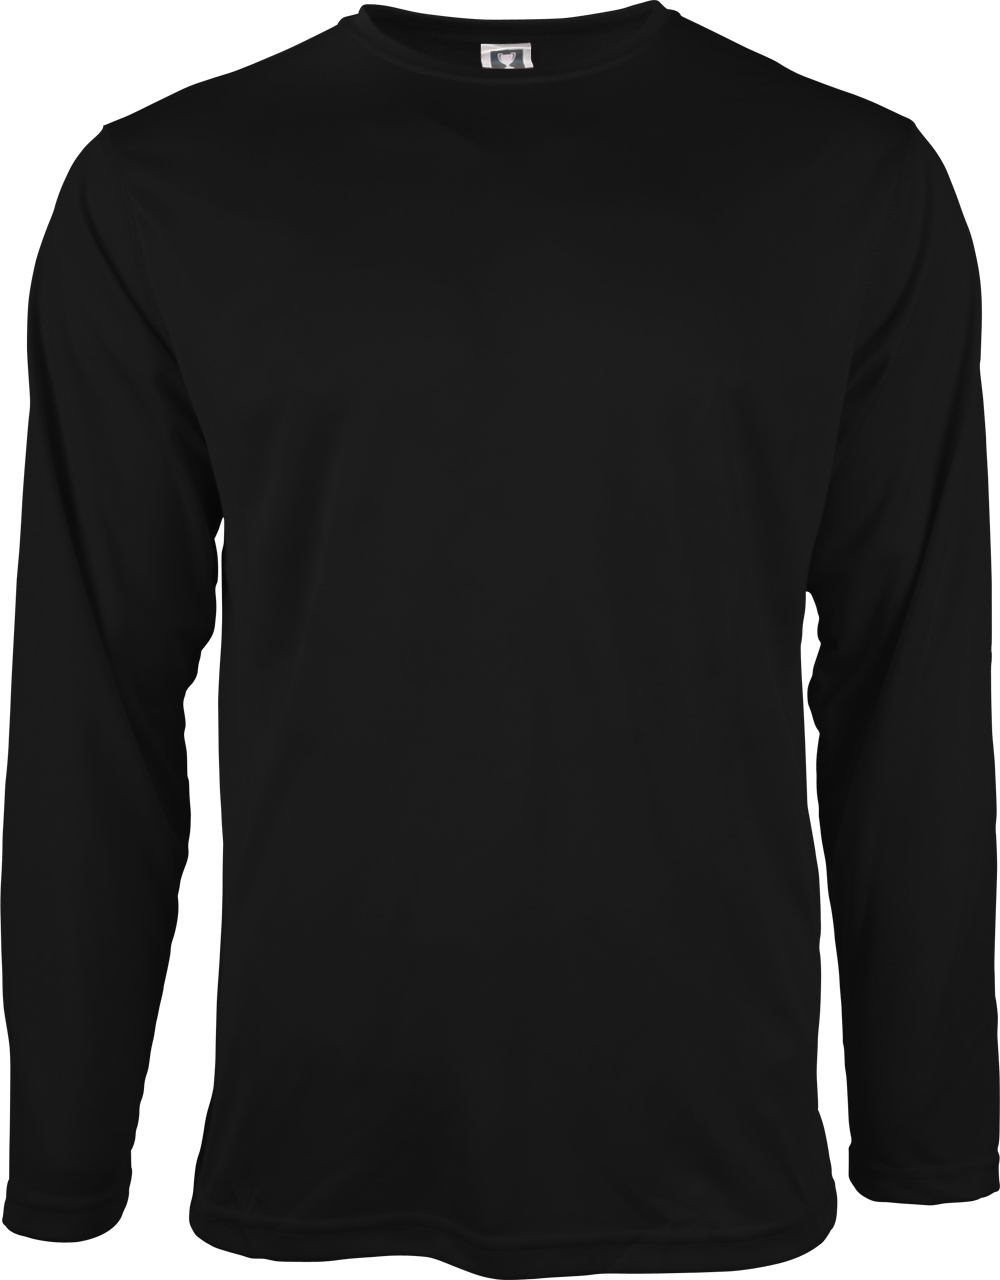 Picture of N3 Sport Long Sleeve Dry Fit Youth Shirt